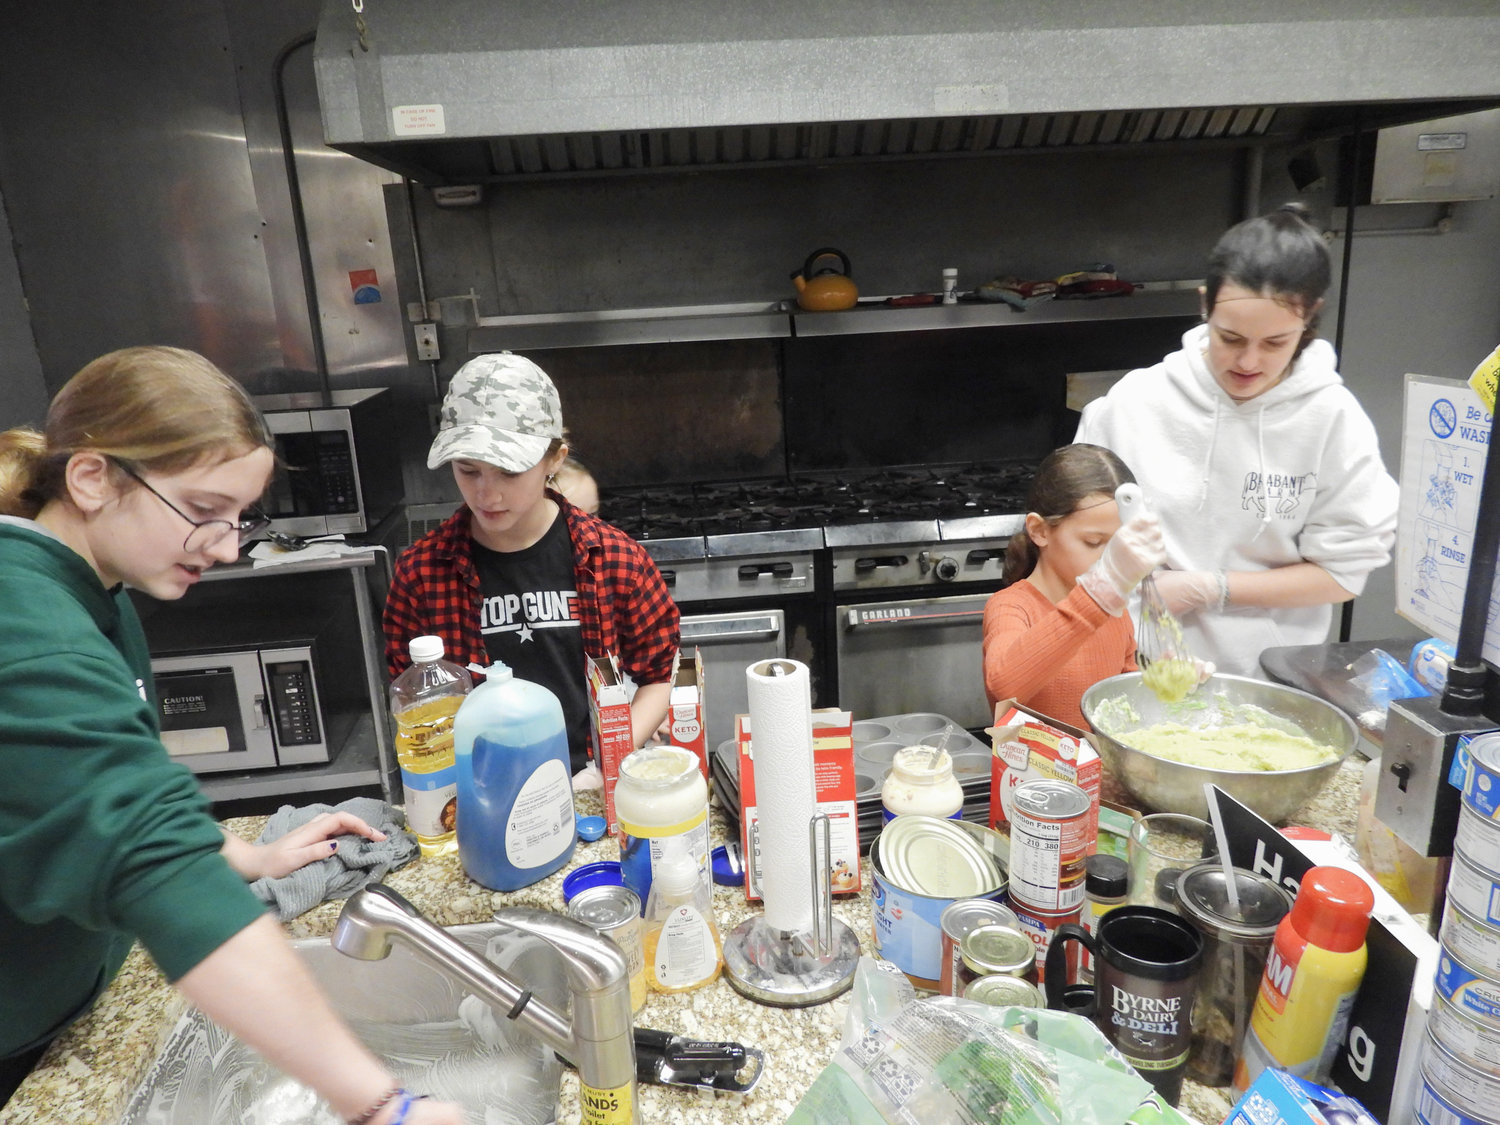 Youth volunteers from Our Lady of Good Counsel in Verona work to assemble meals at Karing Kitchen on Thursday.